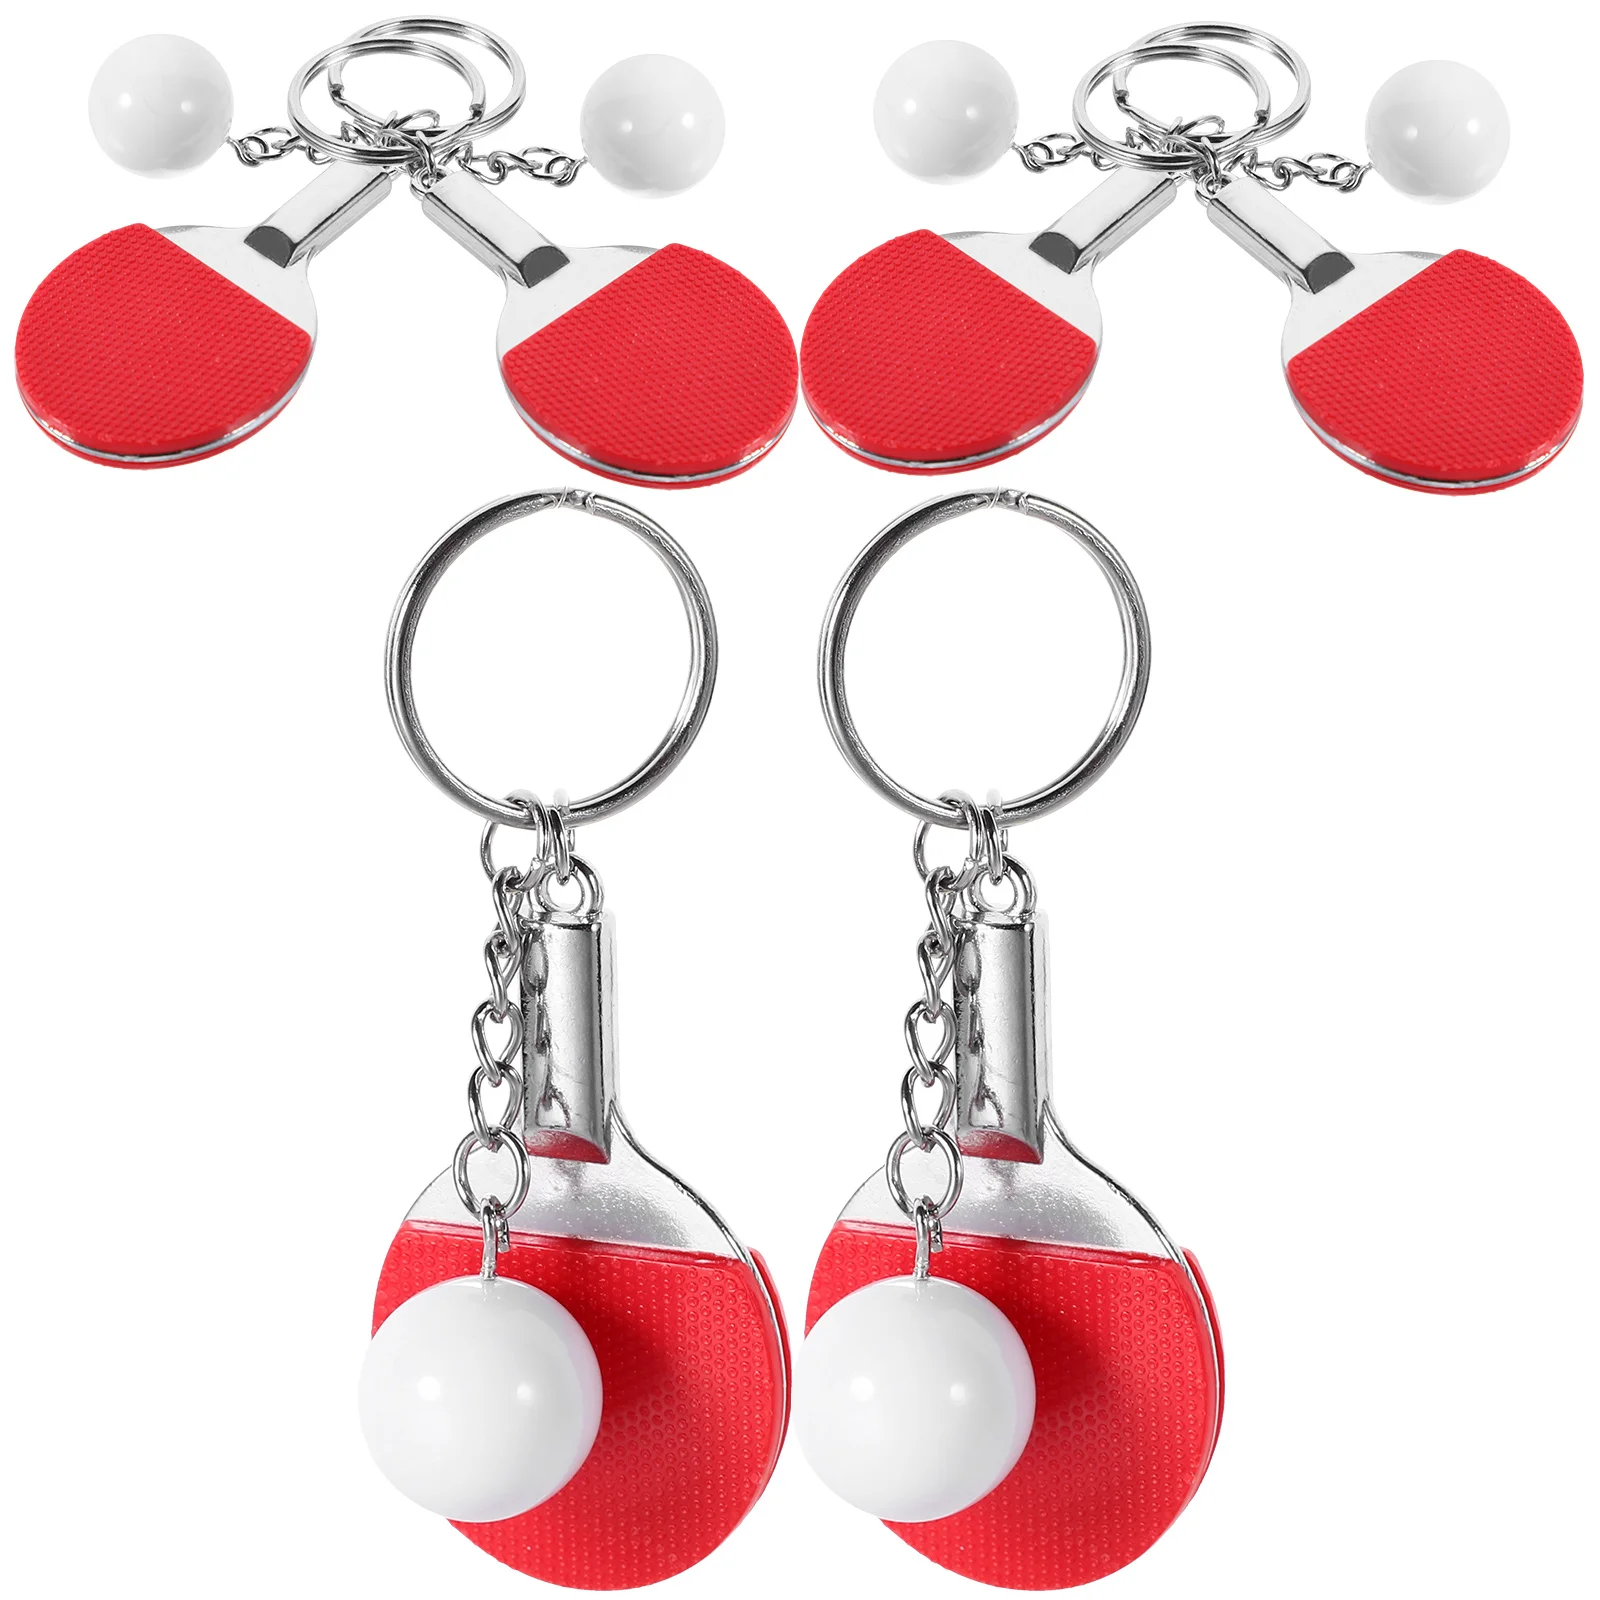 Delicate Table Tennis Keychains Ball Bag Pendant Gift Sporting Goods Simulated Racket (red) 6pcs for Boys Match